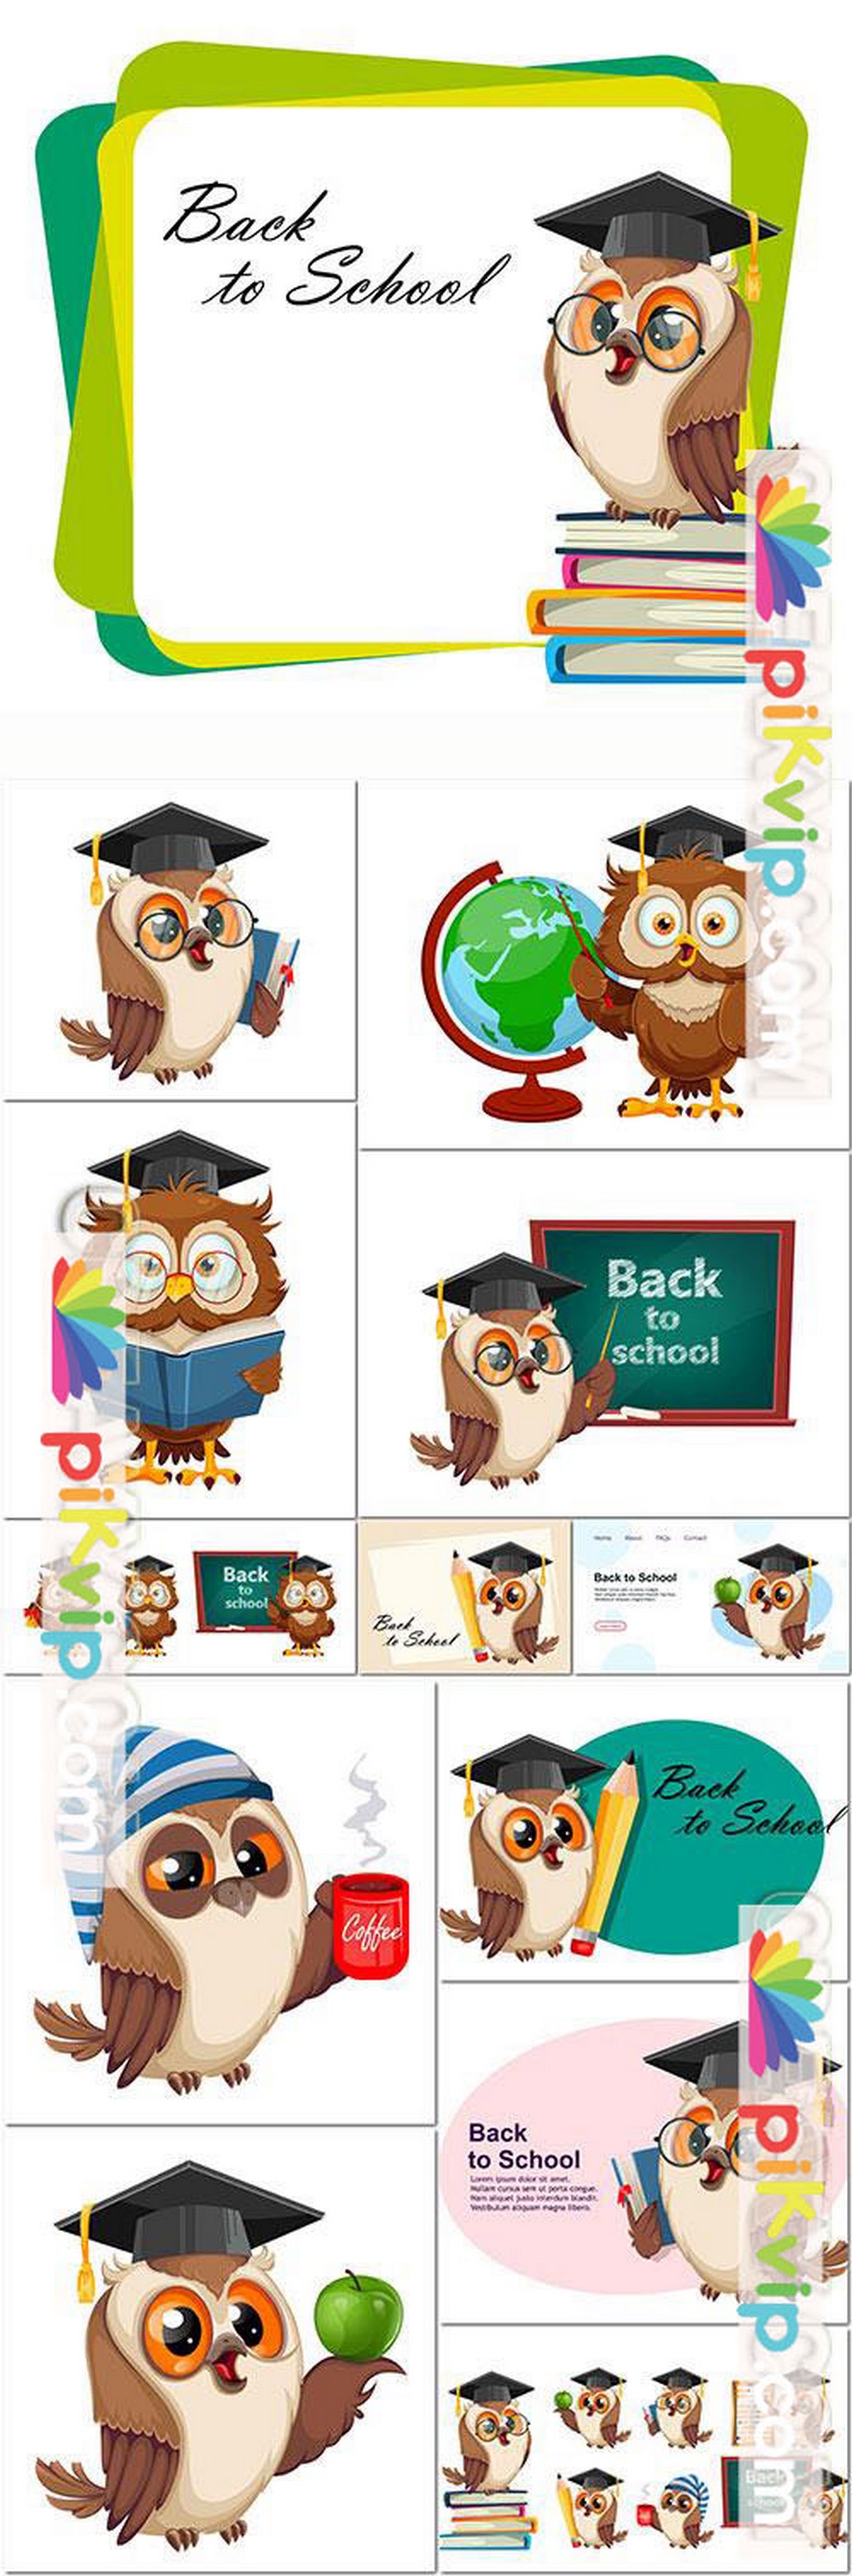 Cute wise owl set of three poses funny owl cartoon character back to school